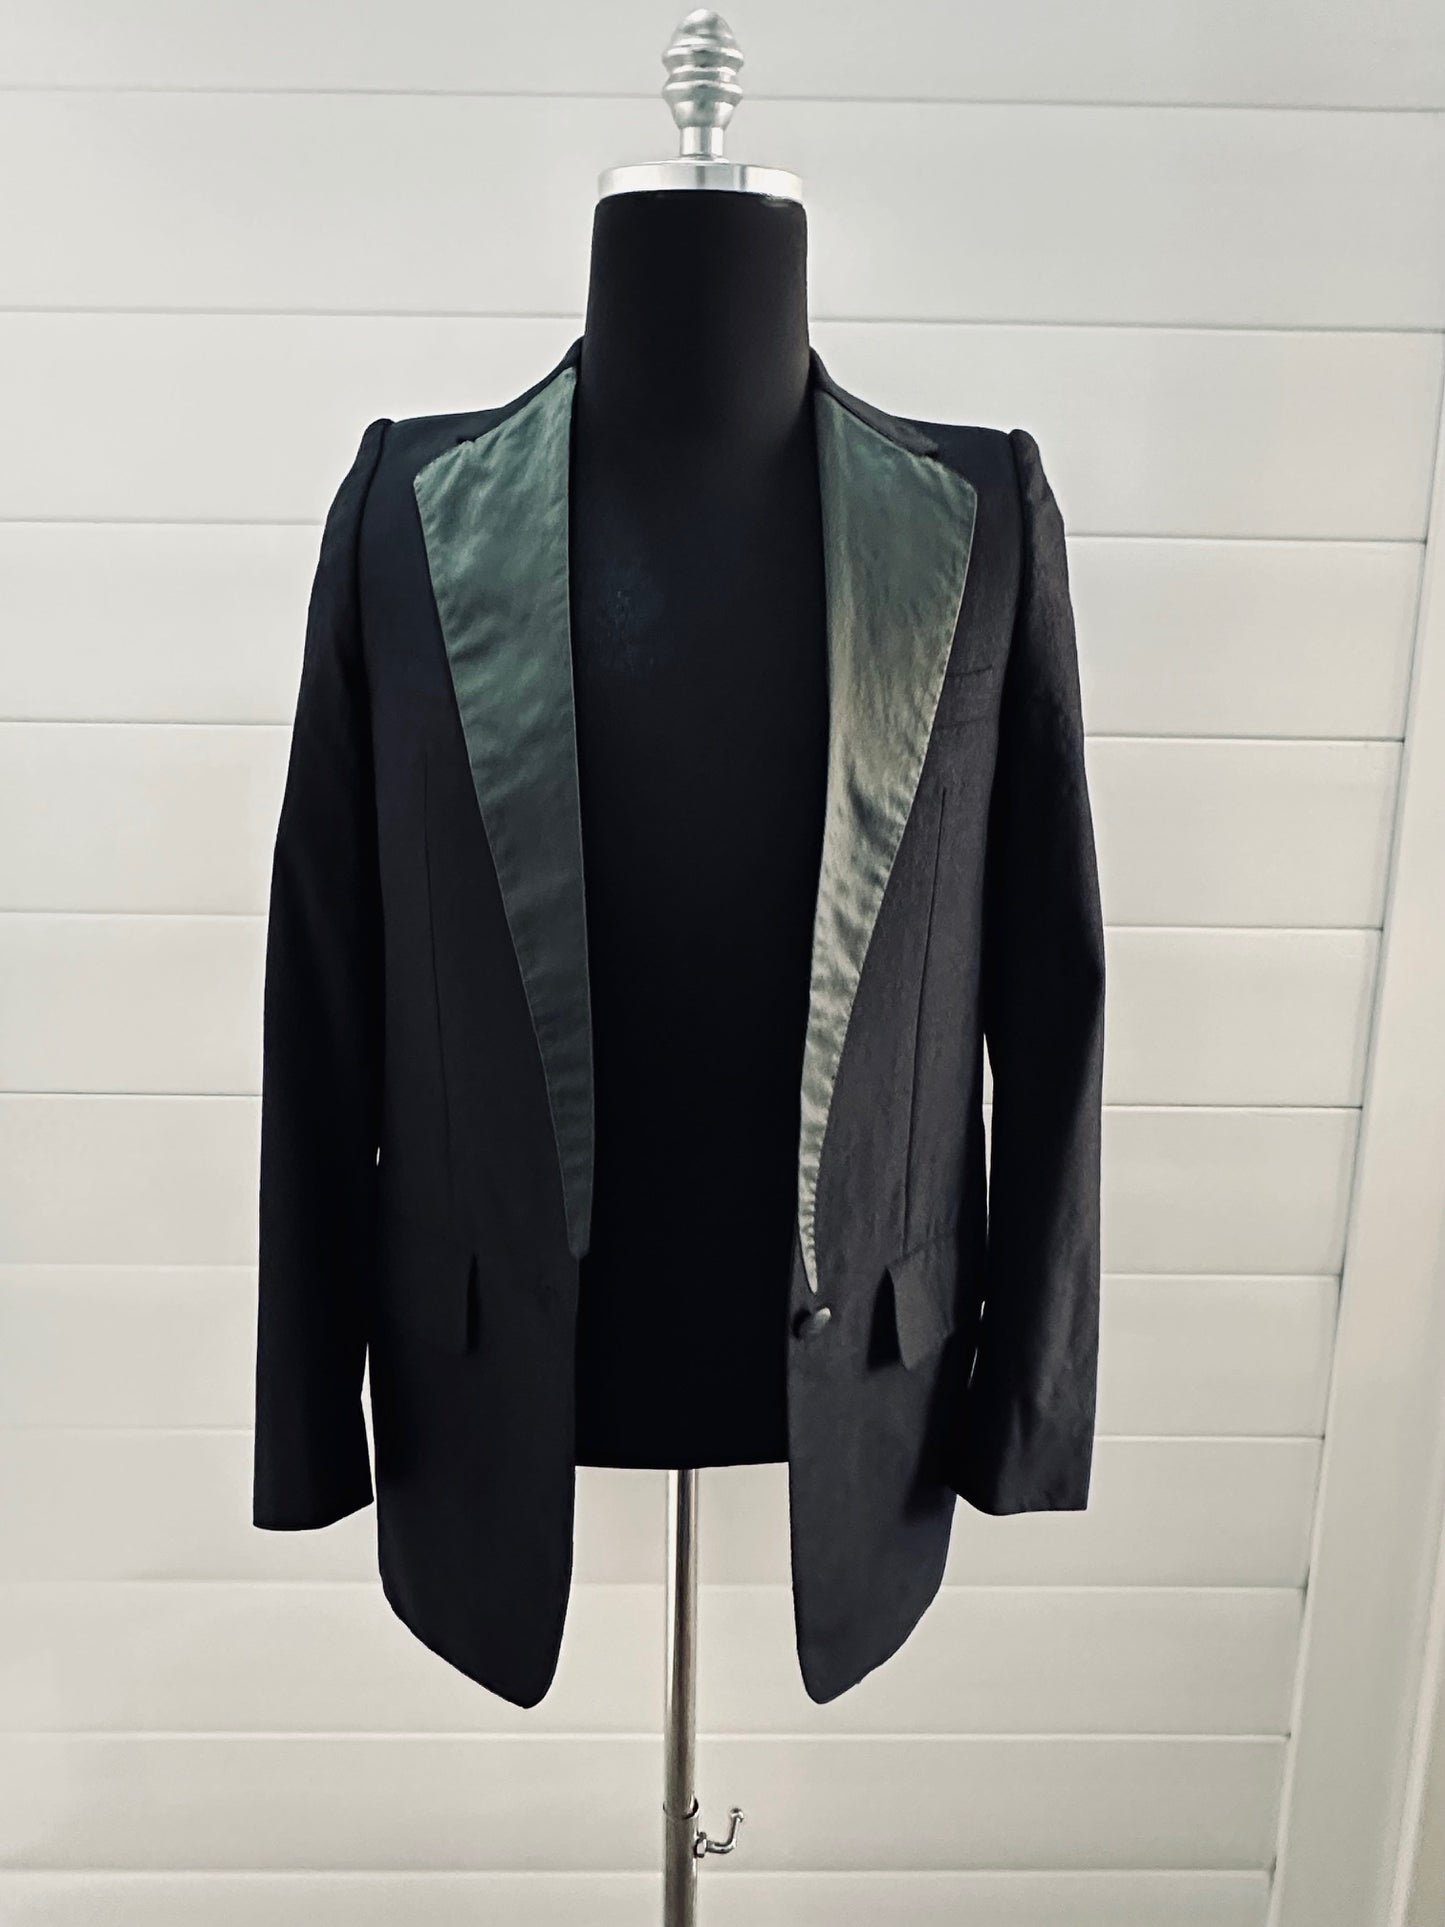 Vintage Black One Button Tux Jacket by Carol Christian Poell